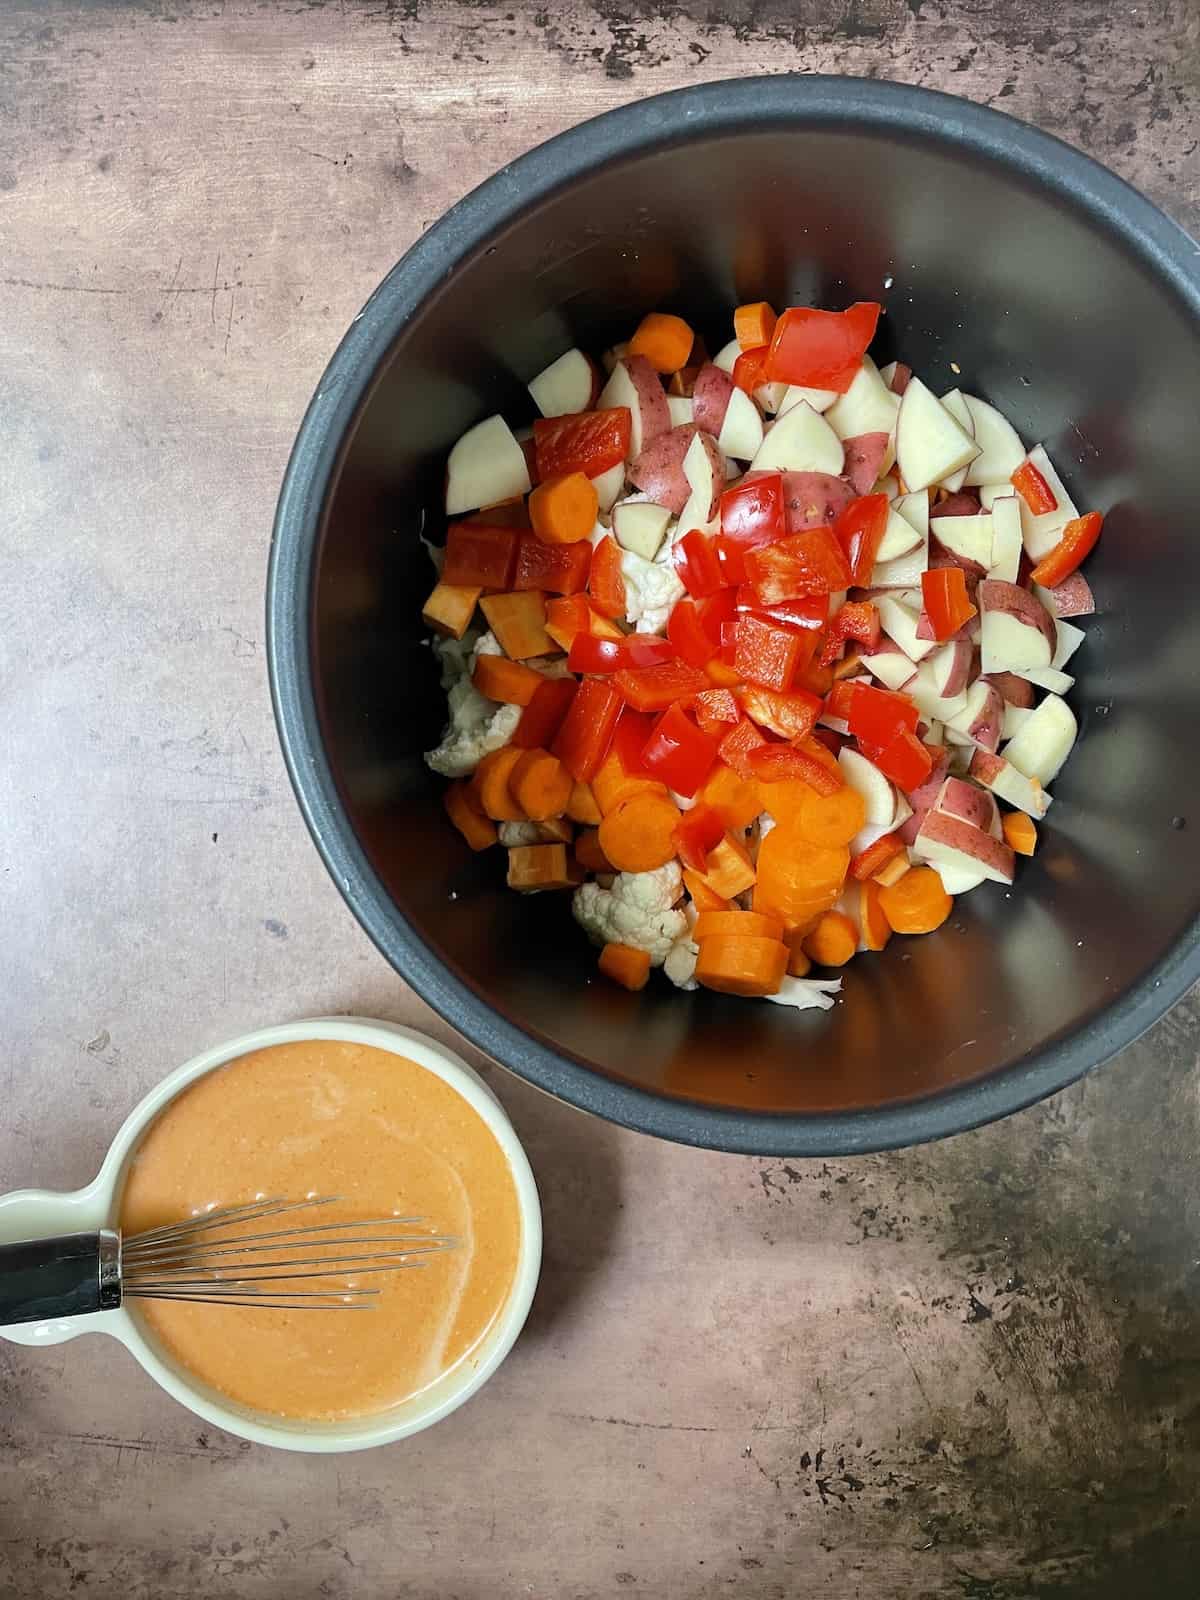 Vegetables in a slow cooker pot with sauce on side.